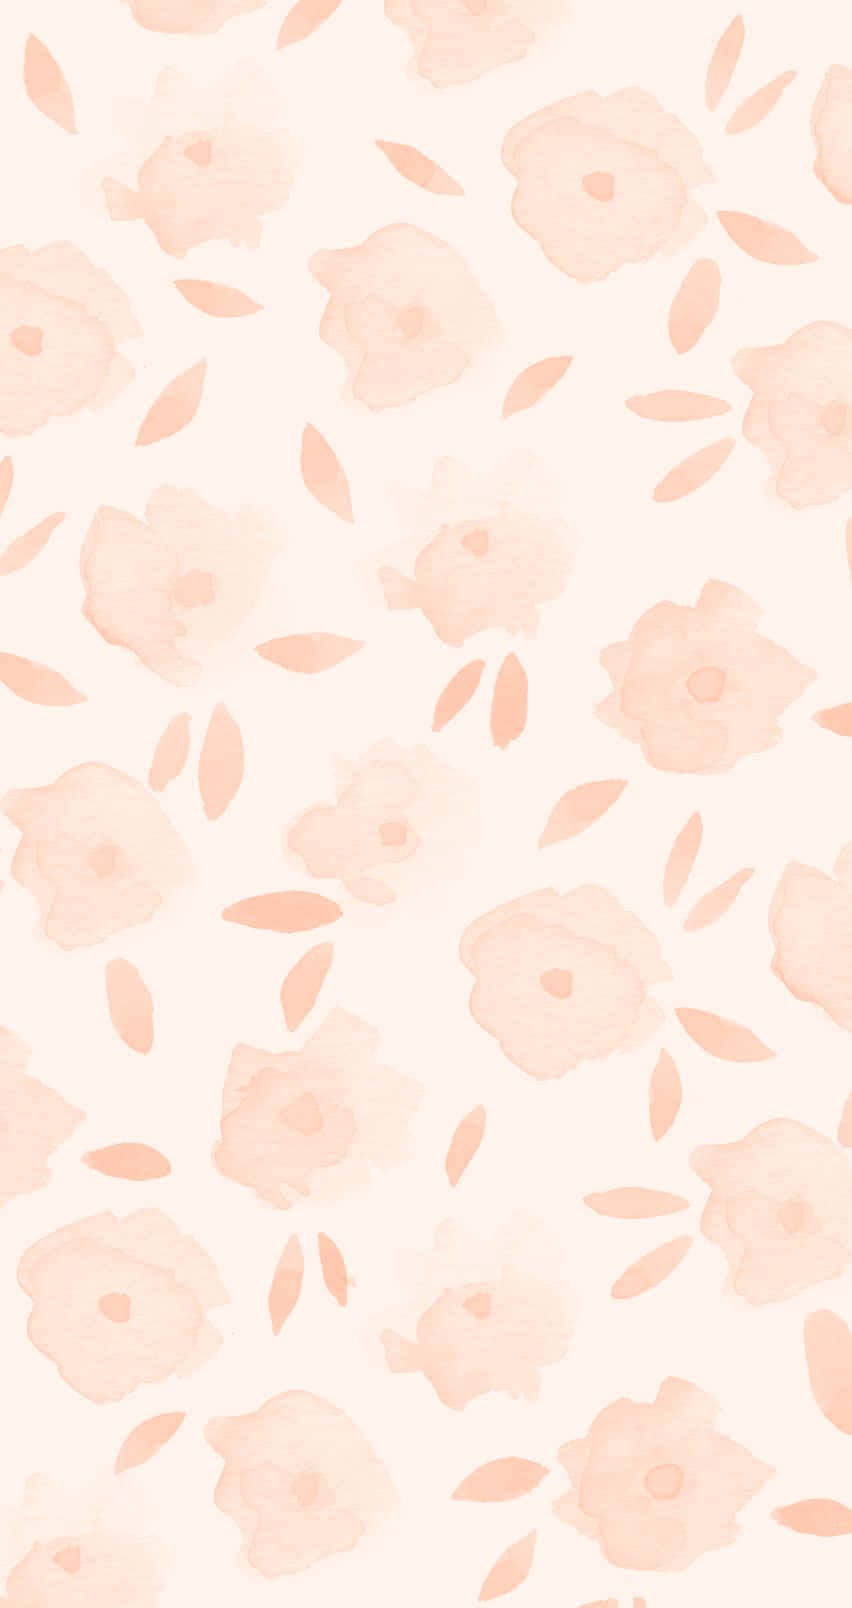 Refresh your device with a splash of vibrant peach Wallpaper